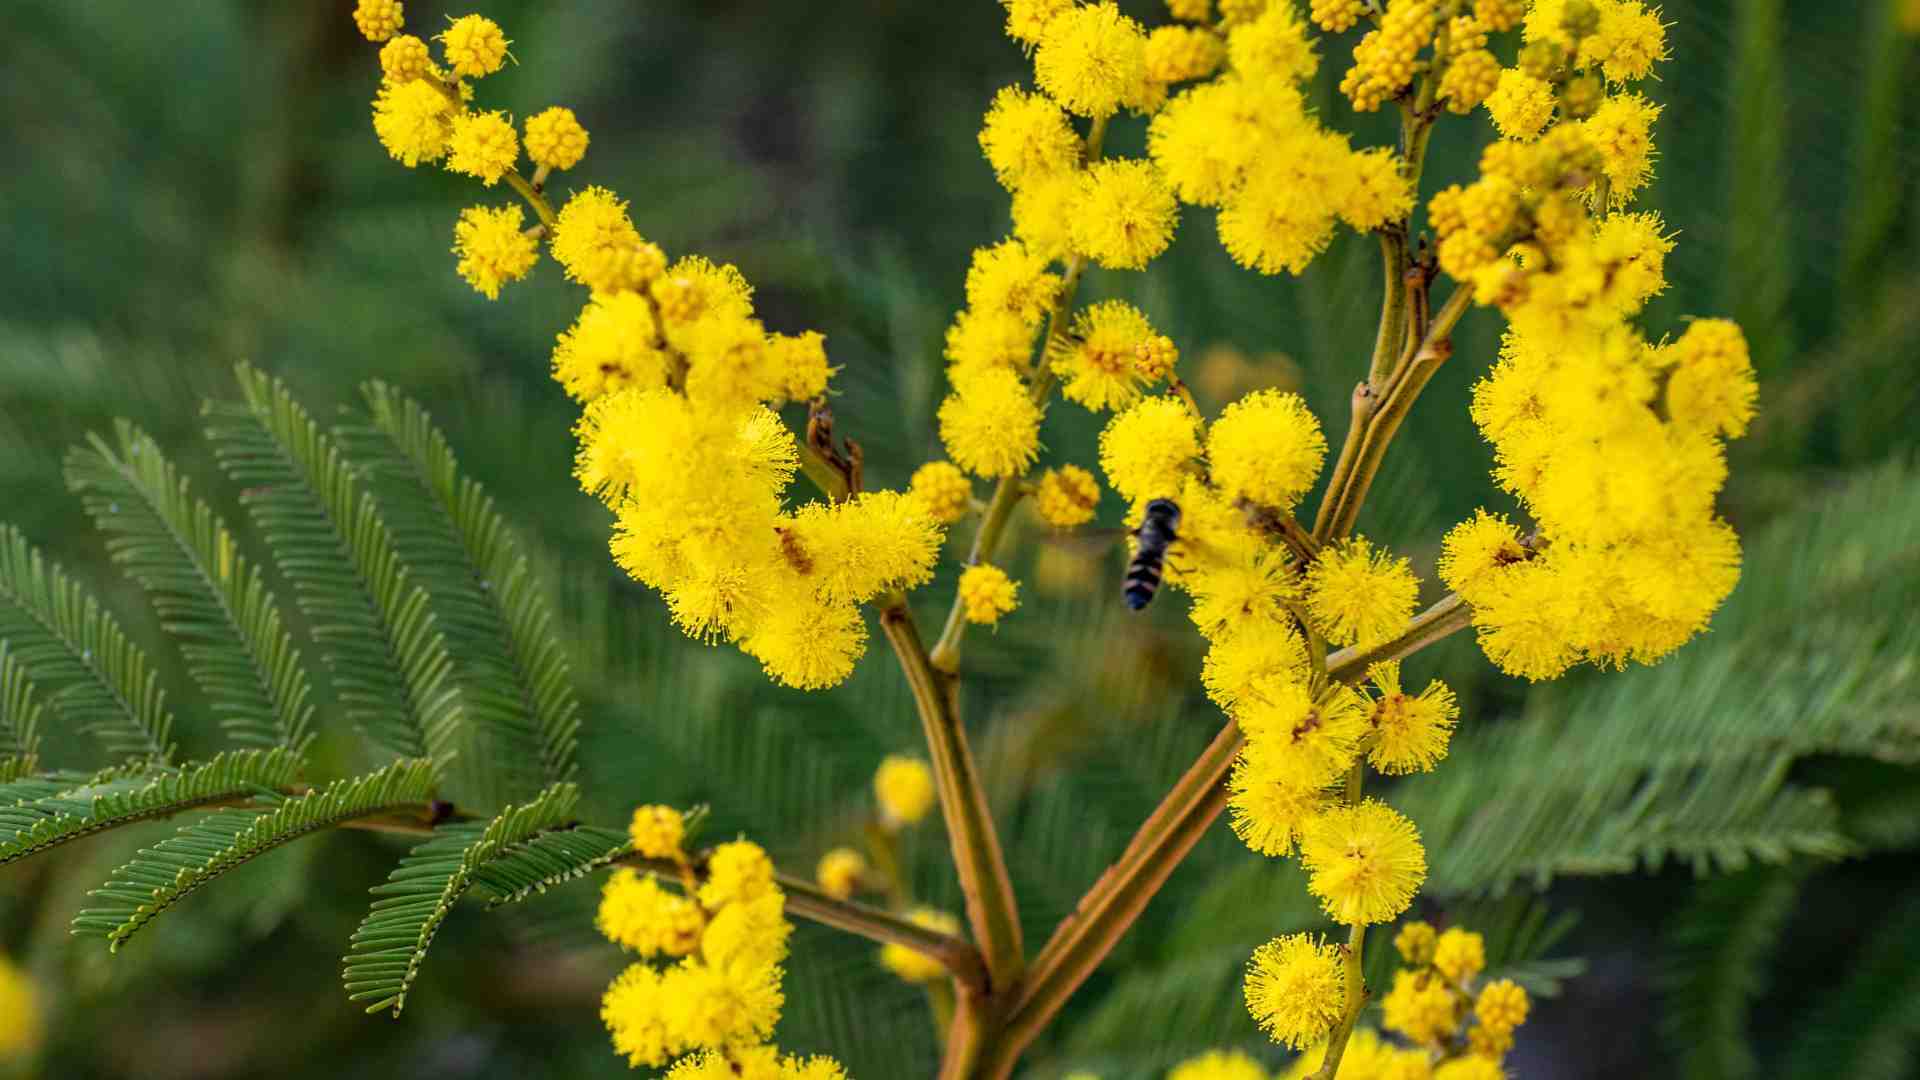 Wattle flower with insects